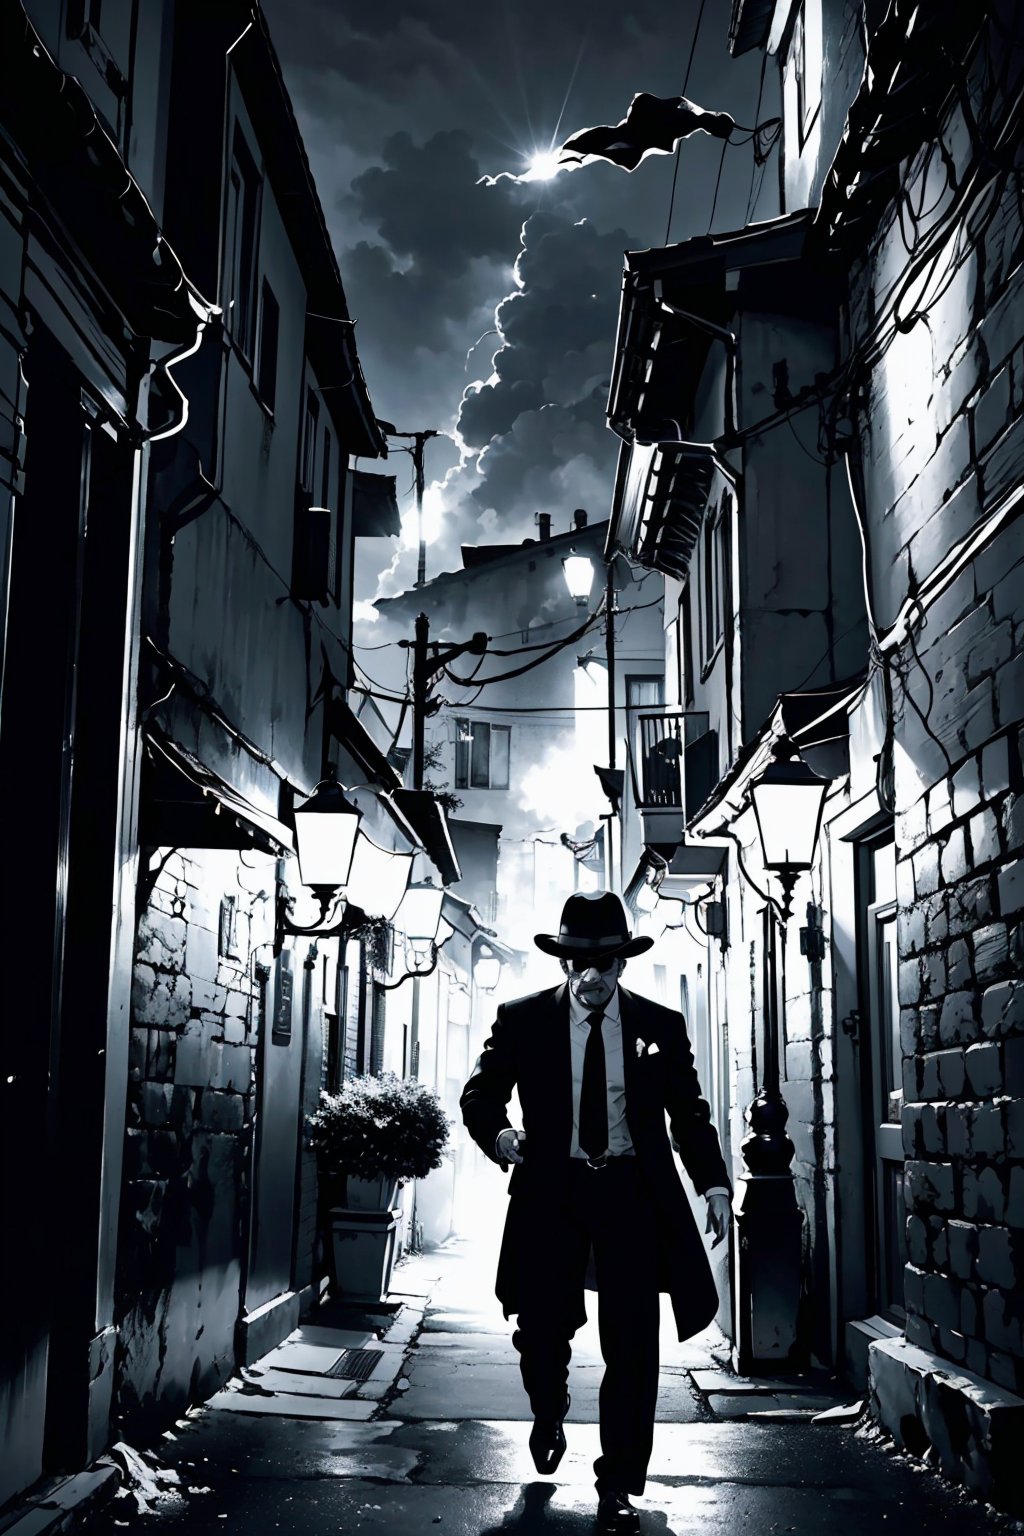 A misty night in Little Italy. The dimly lit alleyway is bathed in the soft glow of a lone streetlamp. A suave Italian mafia member, dressed to impress in a black suit and fedora, stands tall with one hand extended. He's tossing a handful of cash into the air, the bills fluttering like wispy fog as they disperse. The atmosphere is tense yet refined, as if the very fate of the city hangs in the balance. A masterpiece of monochrome mastery.